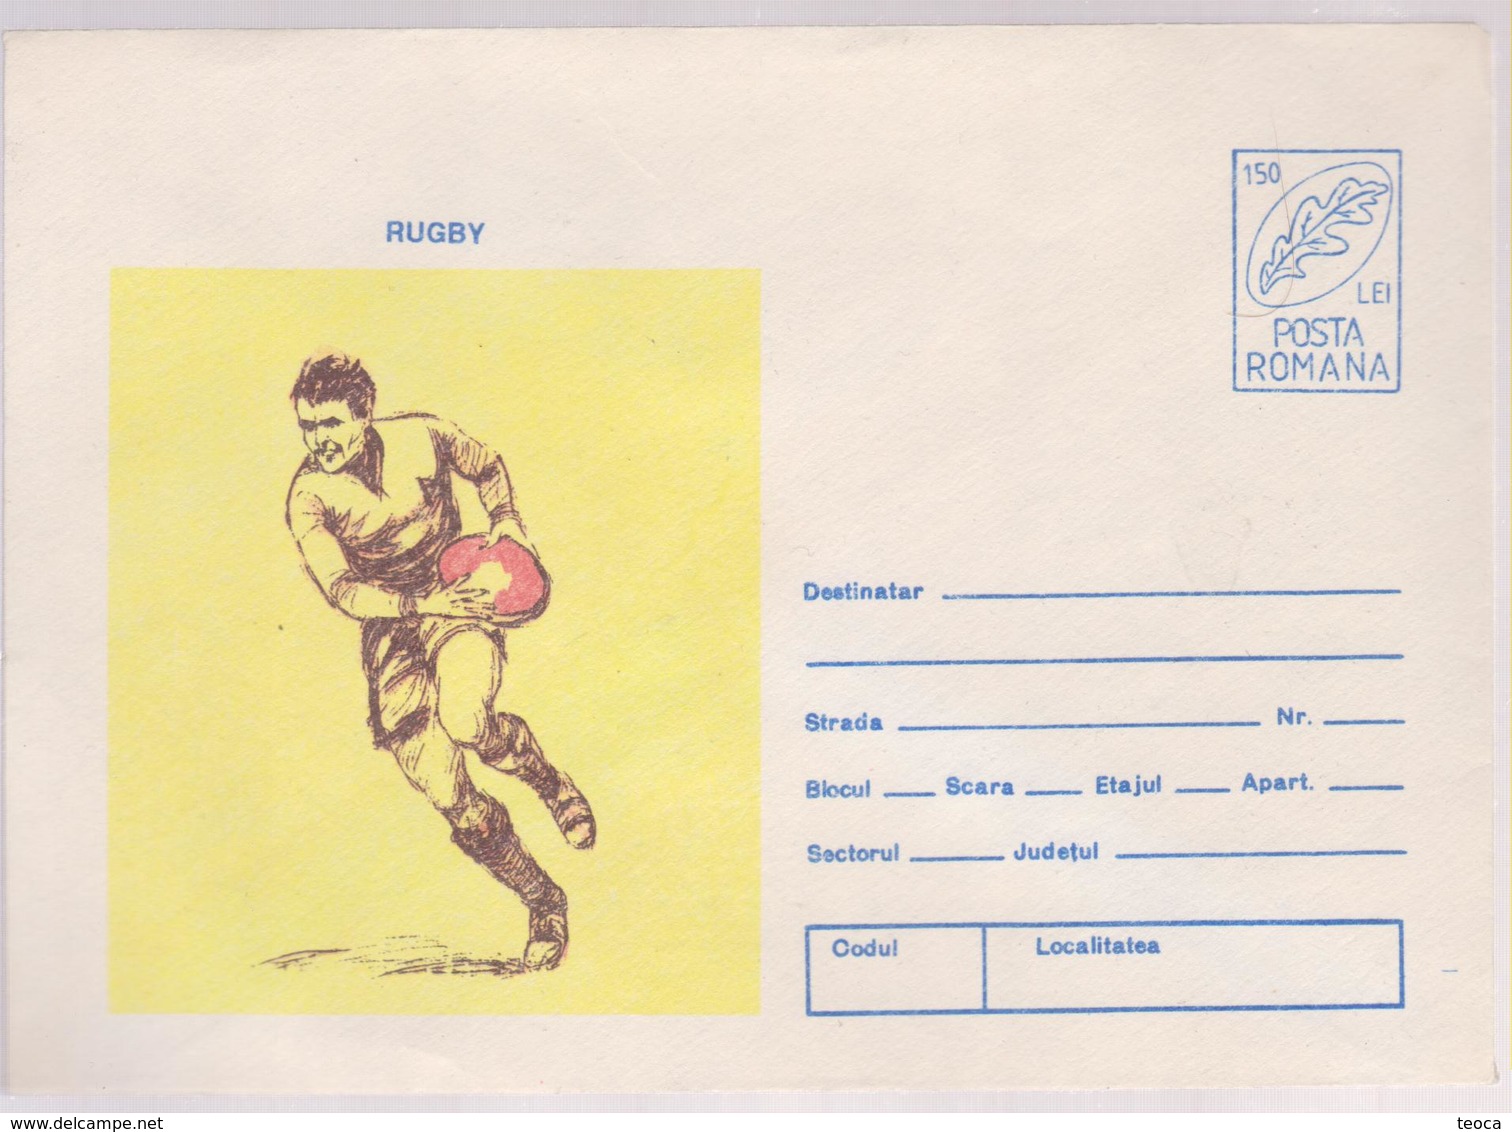 RUGBY COVER ROMANIA 1996 - Rugby